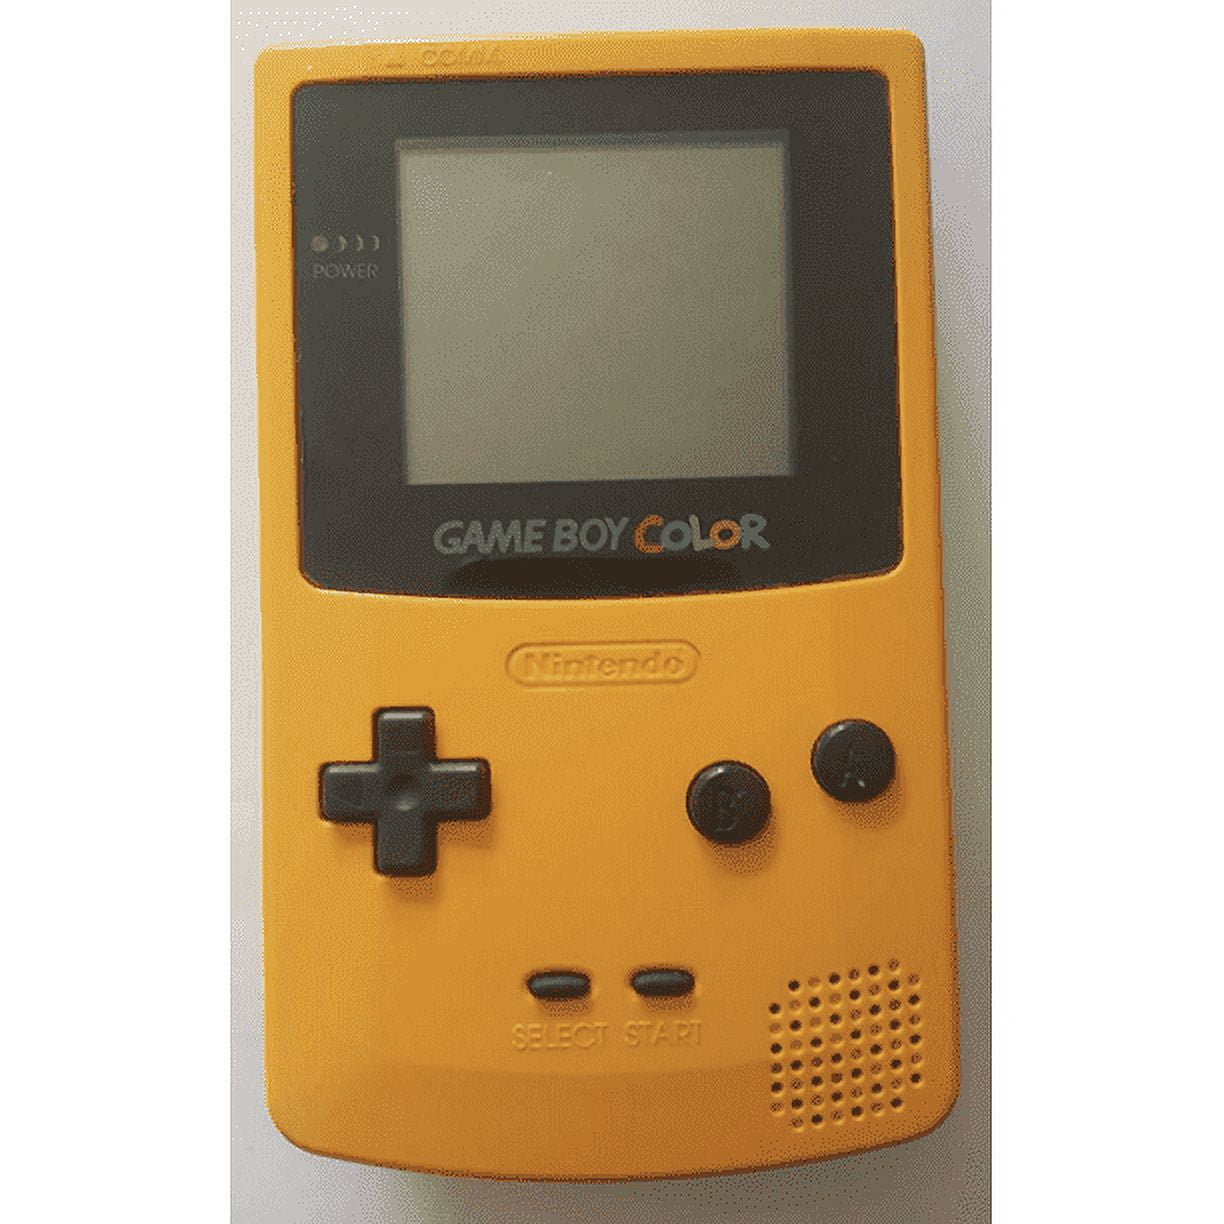 Nintendo GameBoy Game Boy Color - Yellow - Authentic - Used 